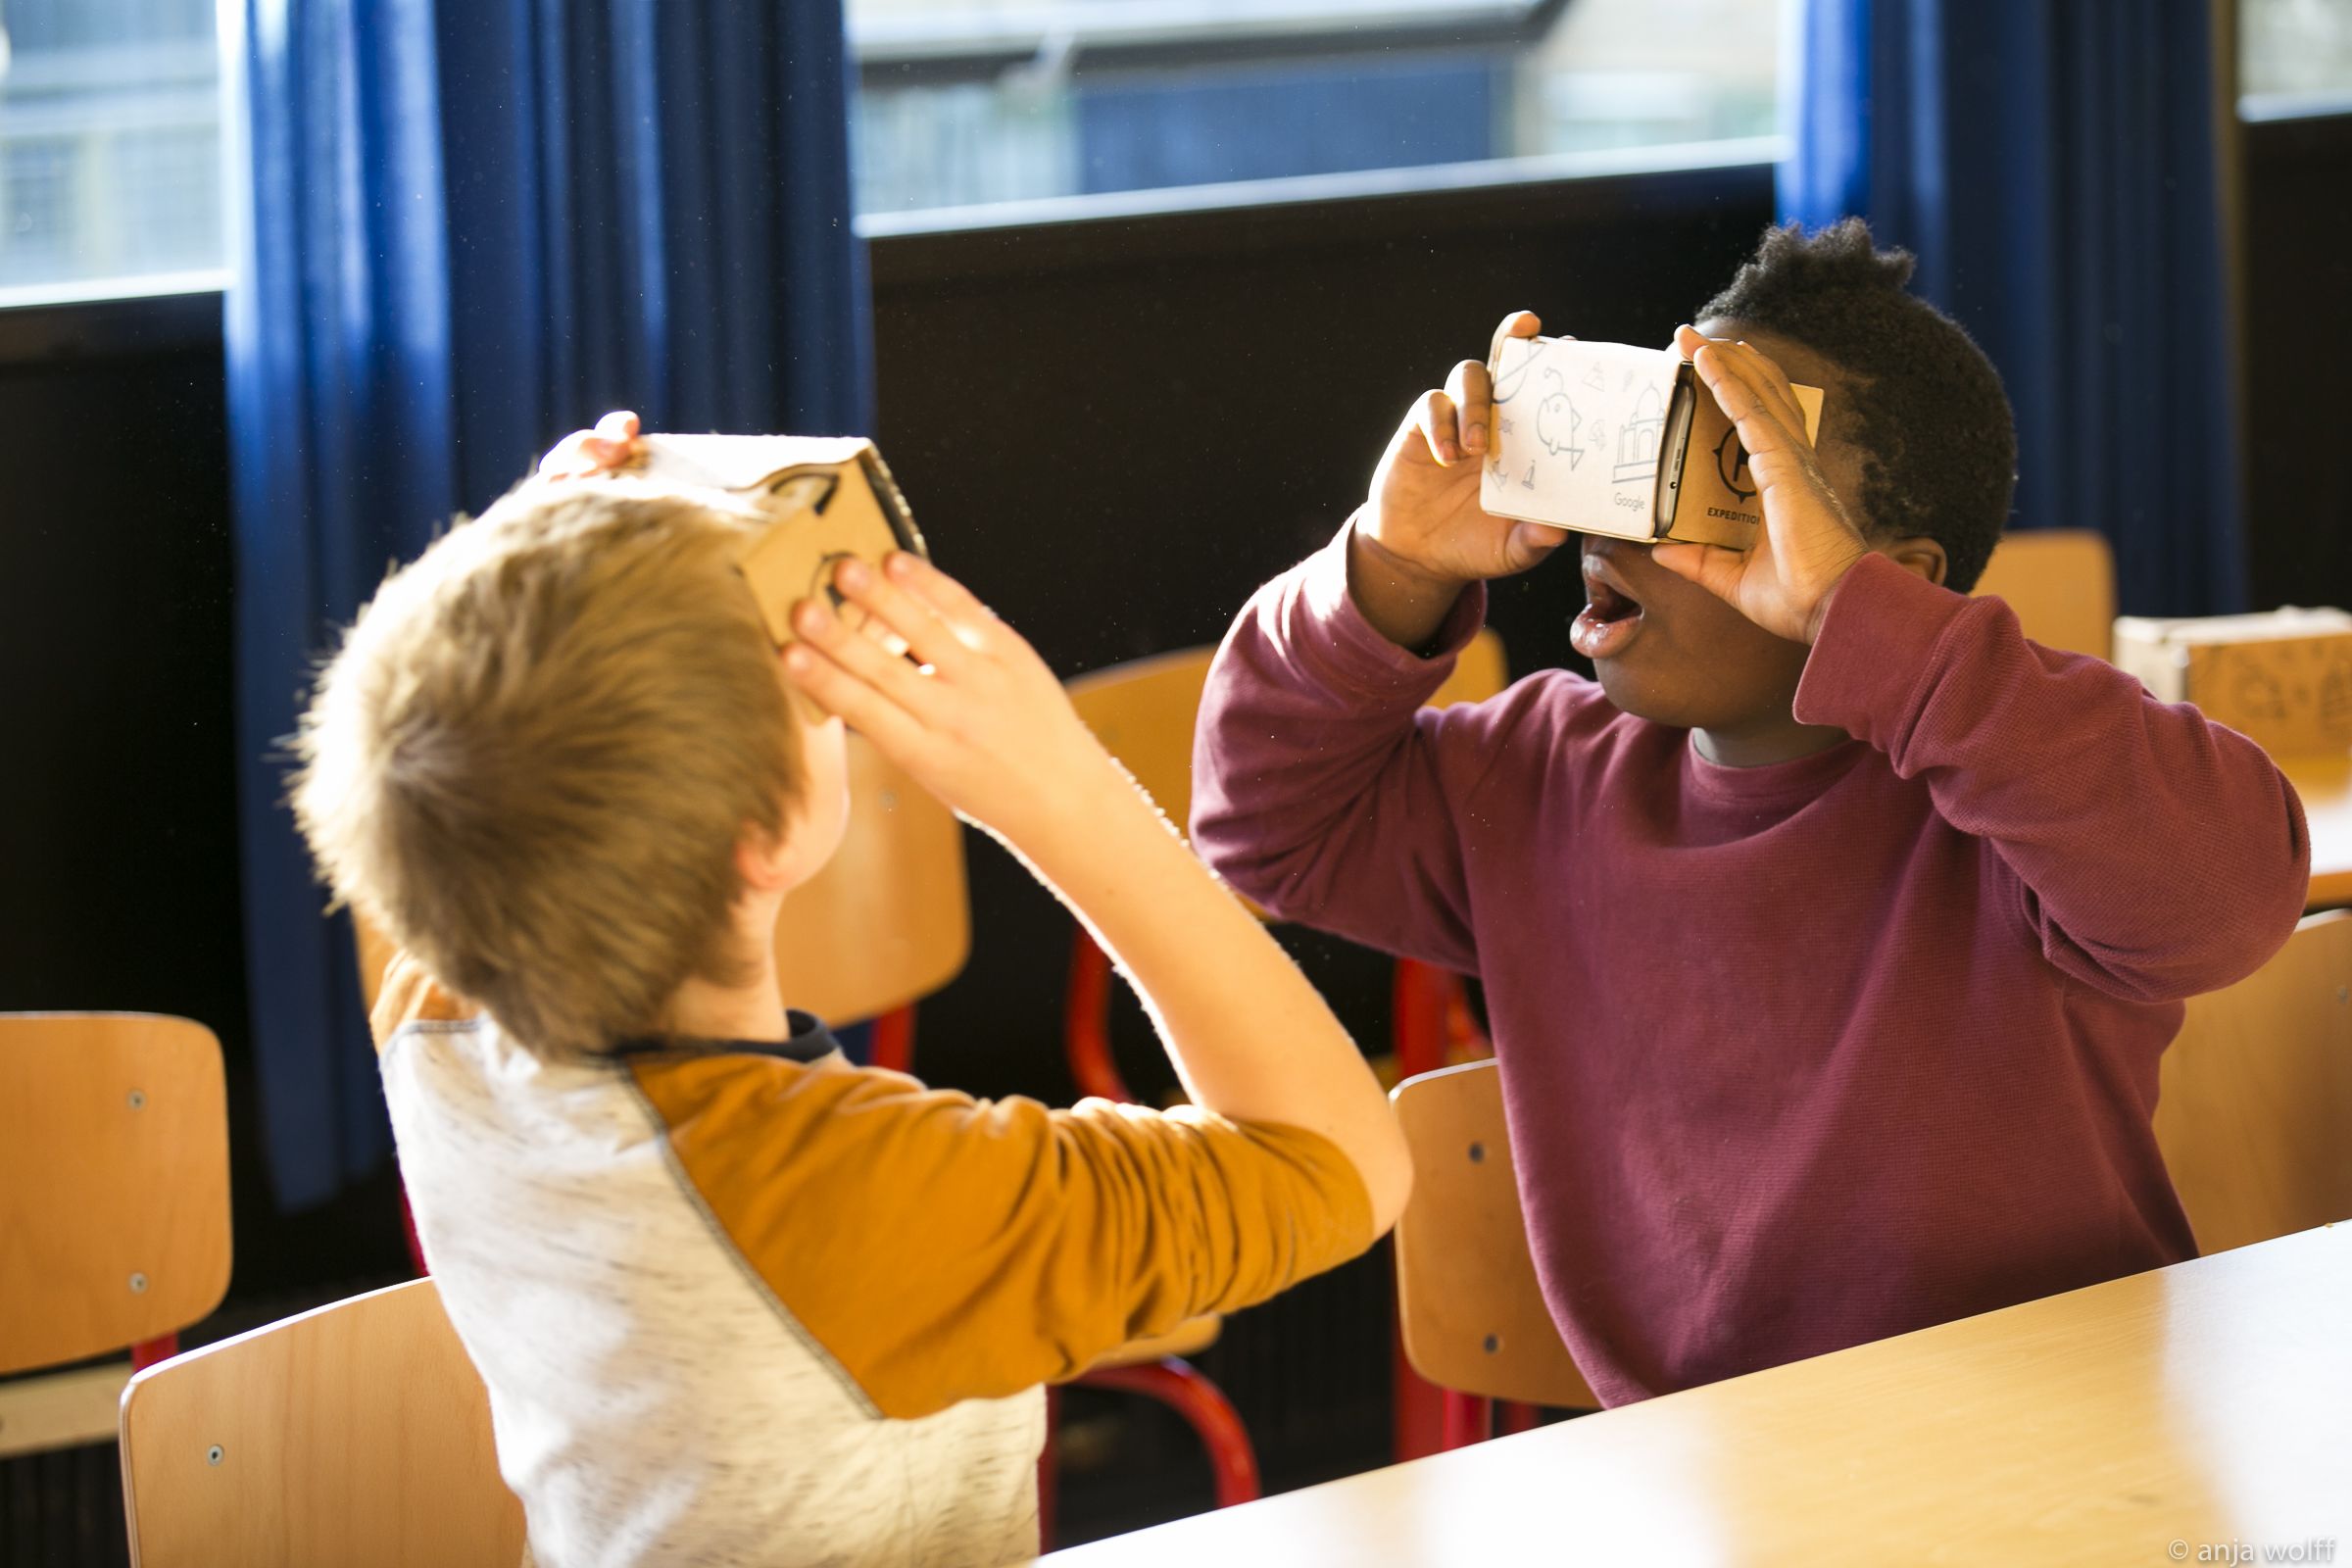 Proof that learning is fun on a virtual field trip